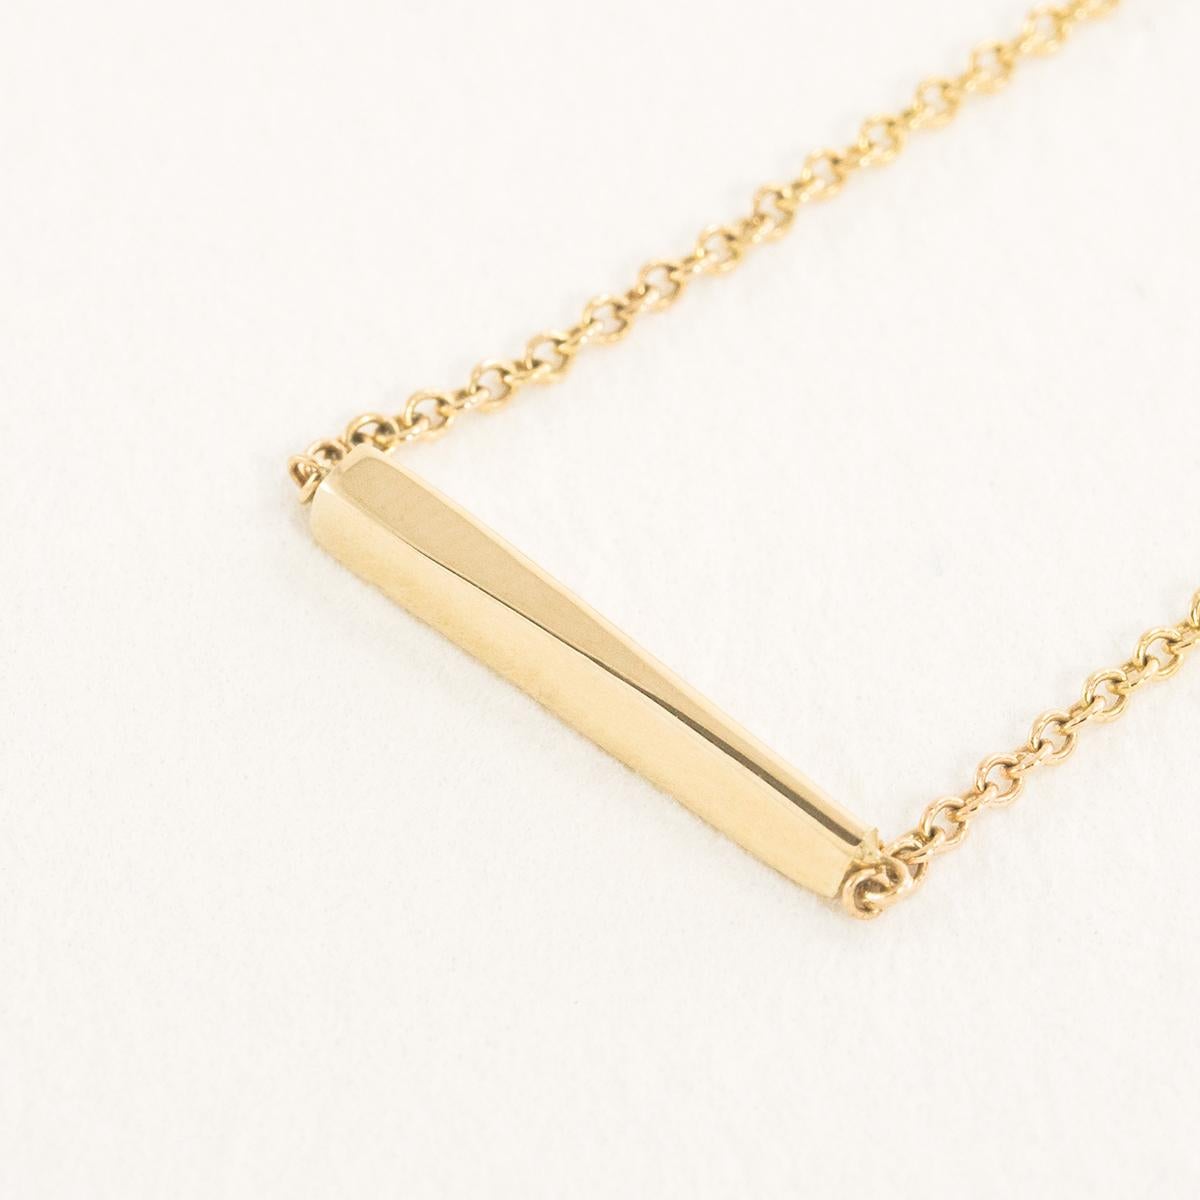 The Interval Bar Necklace shifts from square to triangle end to end. Dynamic and easy, this necklace is a study in subtle motion. A delicate but sturdy 16”/ 1 mm Italian chain makes this piece durable for everyday wear. Crafted in solid 14k gold,